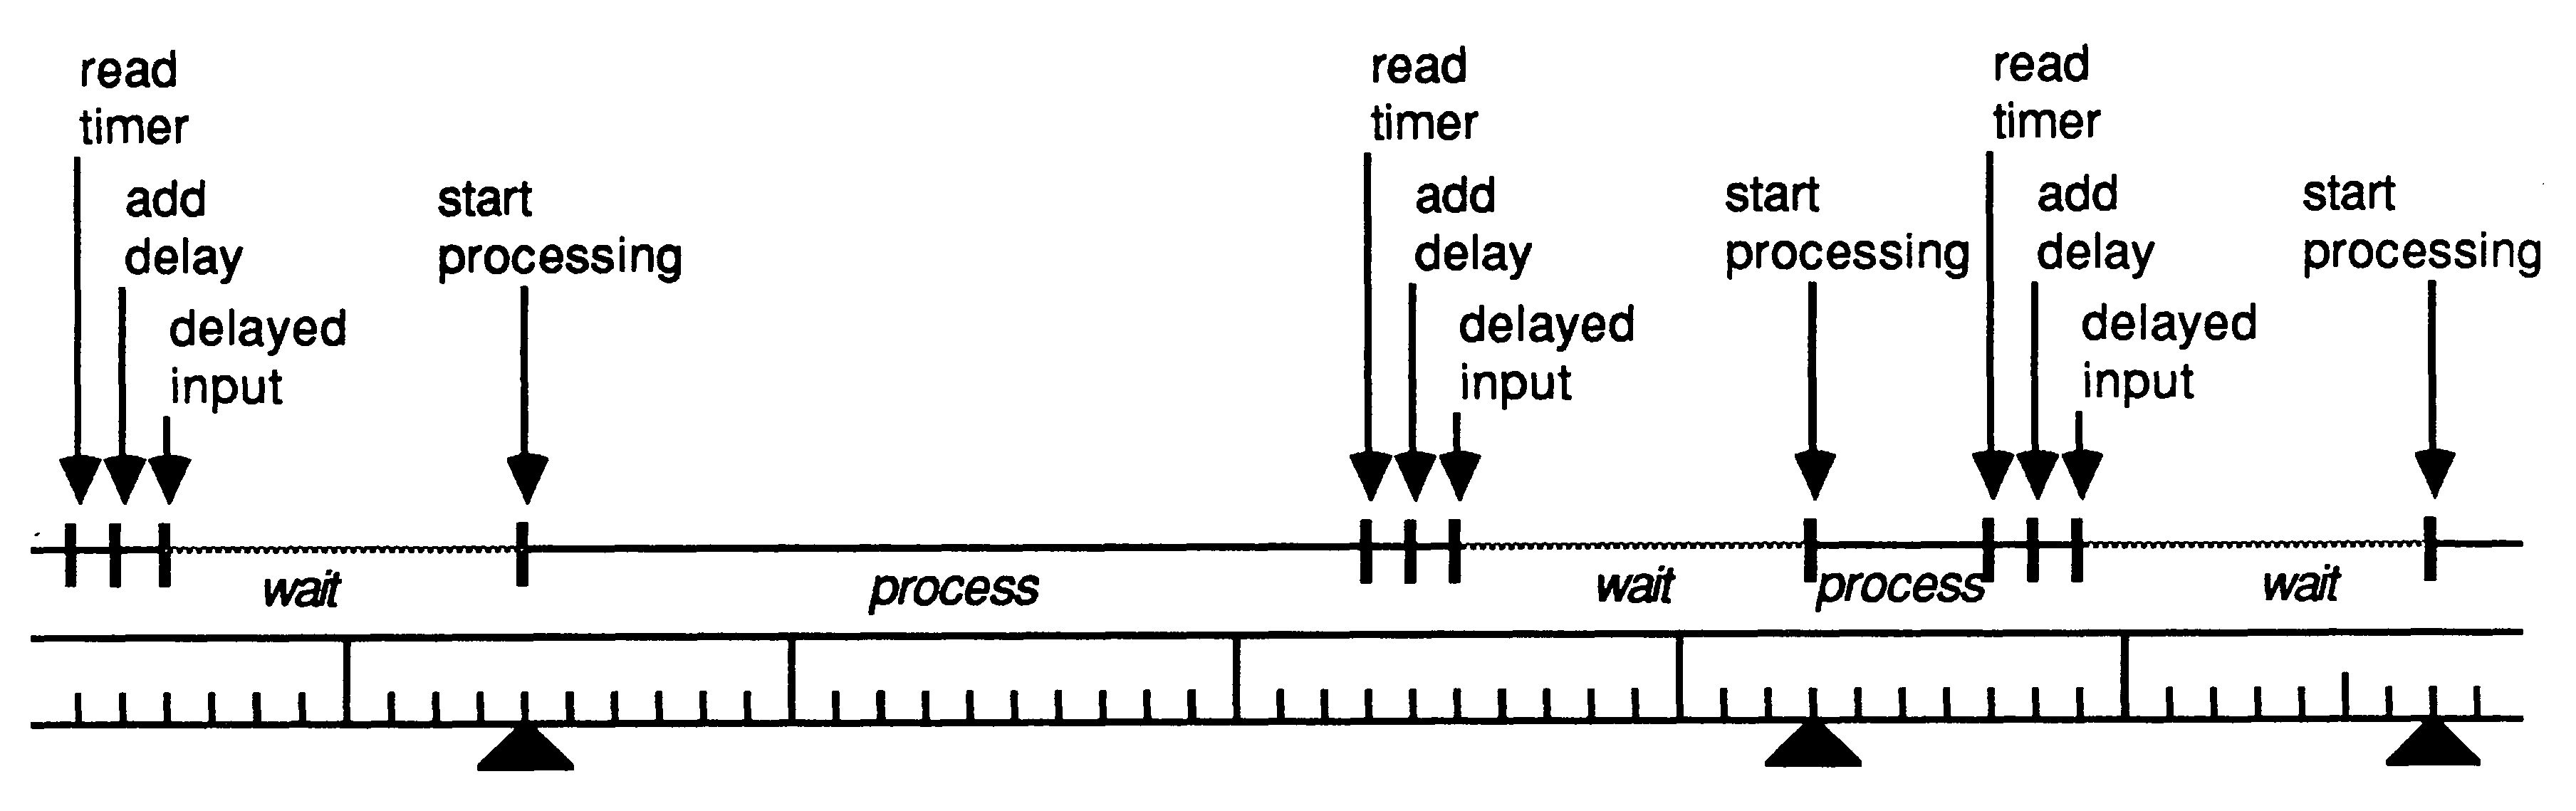 Using timer to generate
delays between processing